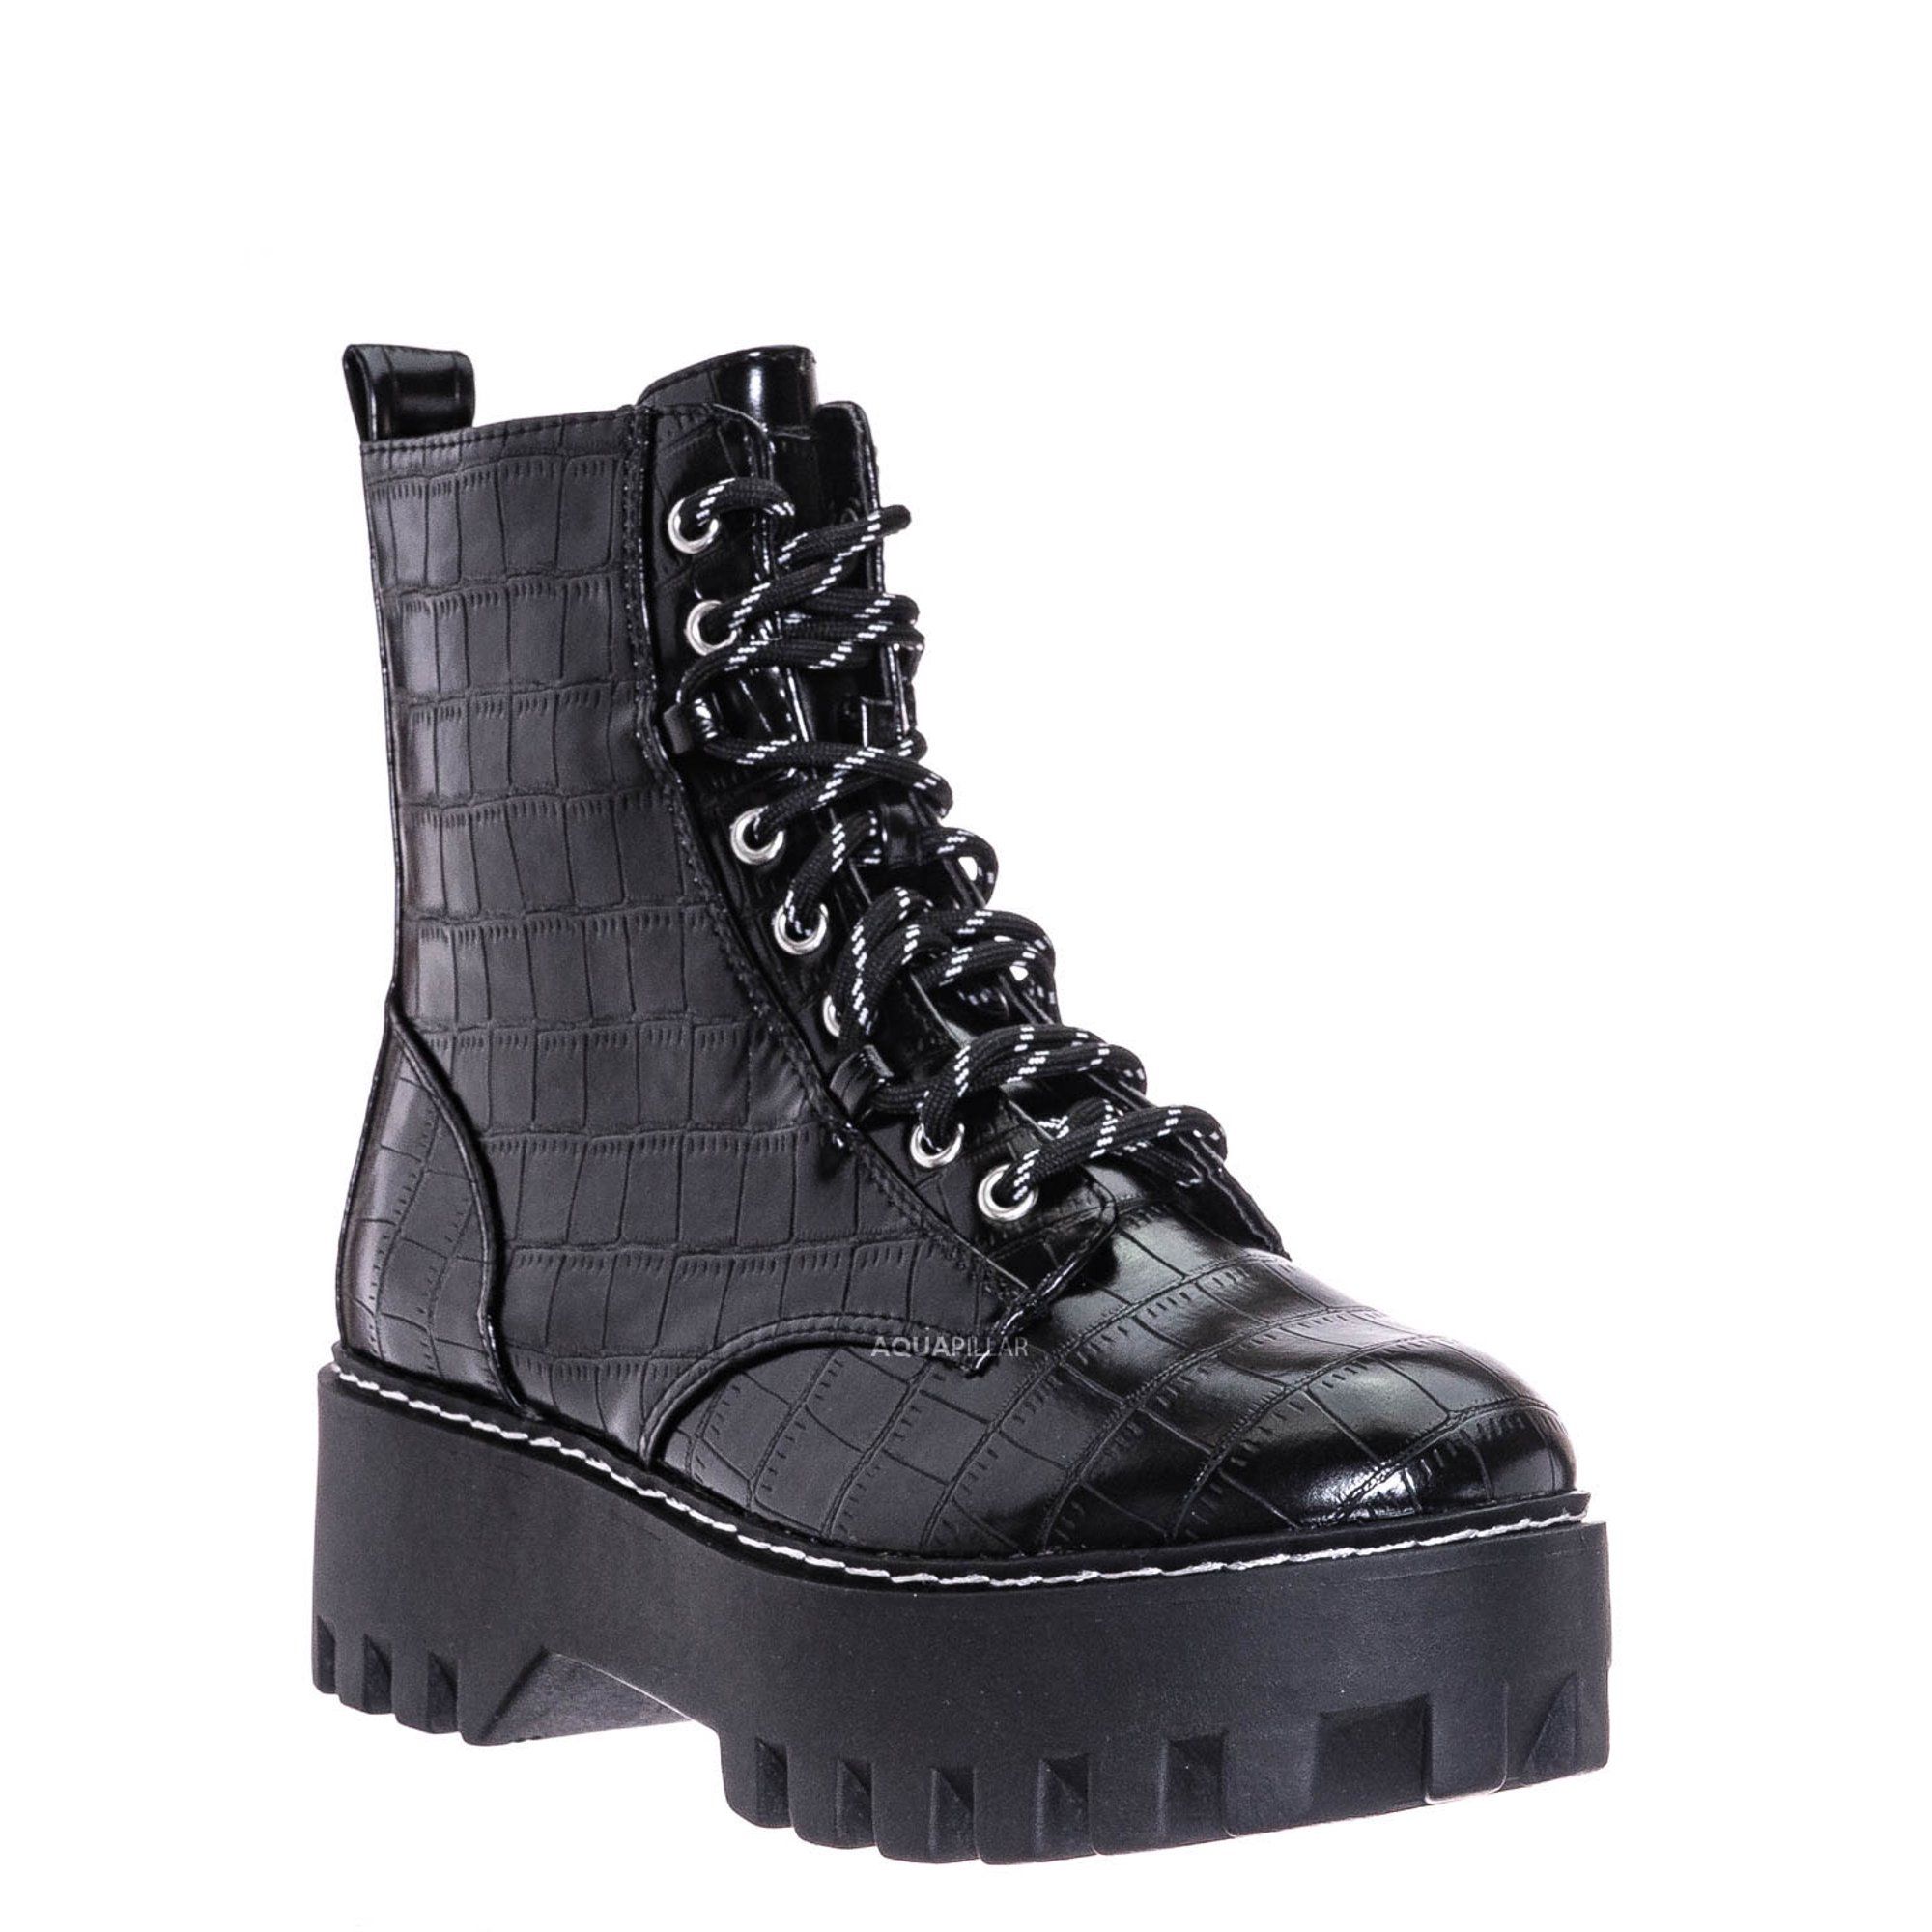 Chunky Edgy Lug Sole Combat Boot- Army Military Threaded Rugged Bootie | Walmart (US)